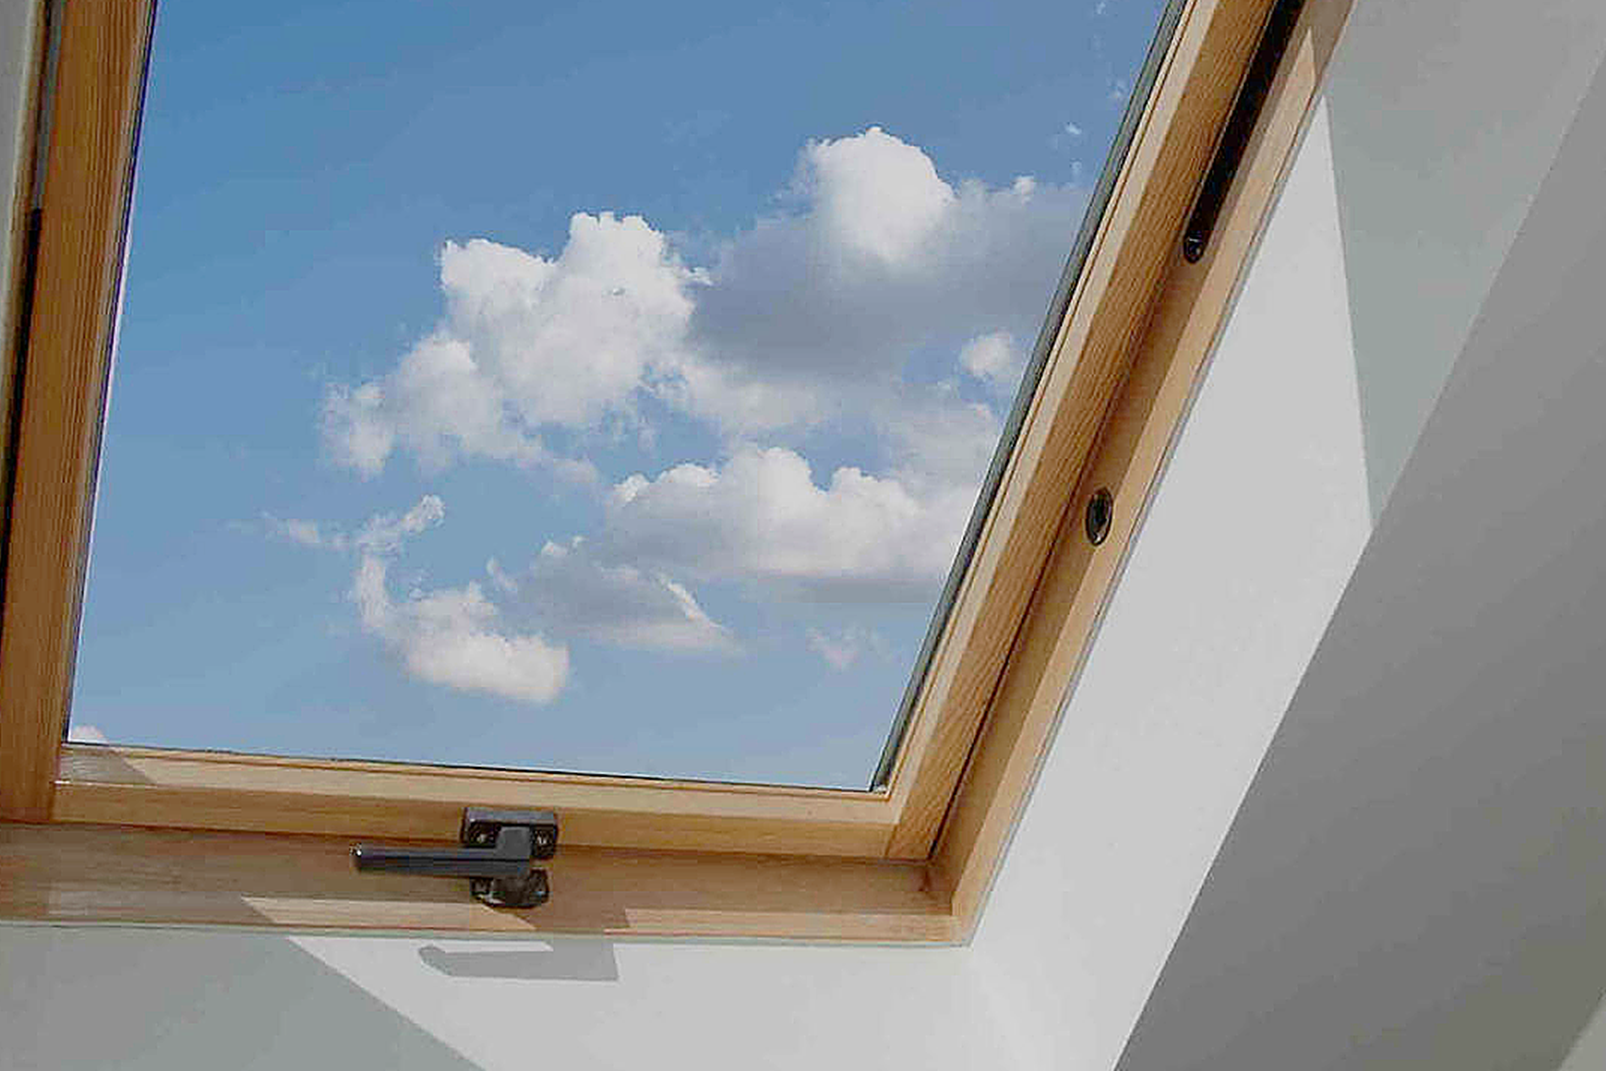 a skylight with a blue sky and clouds visible through it